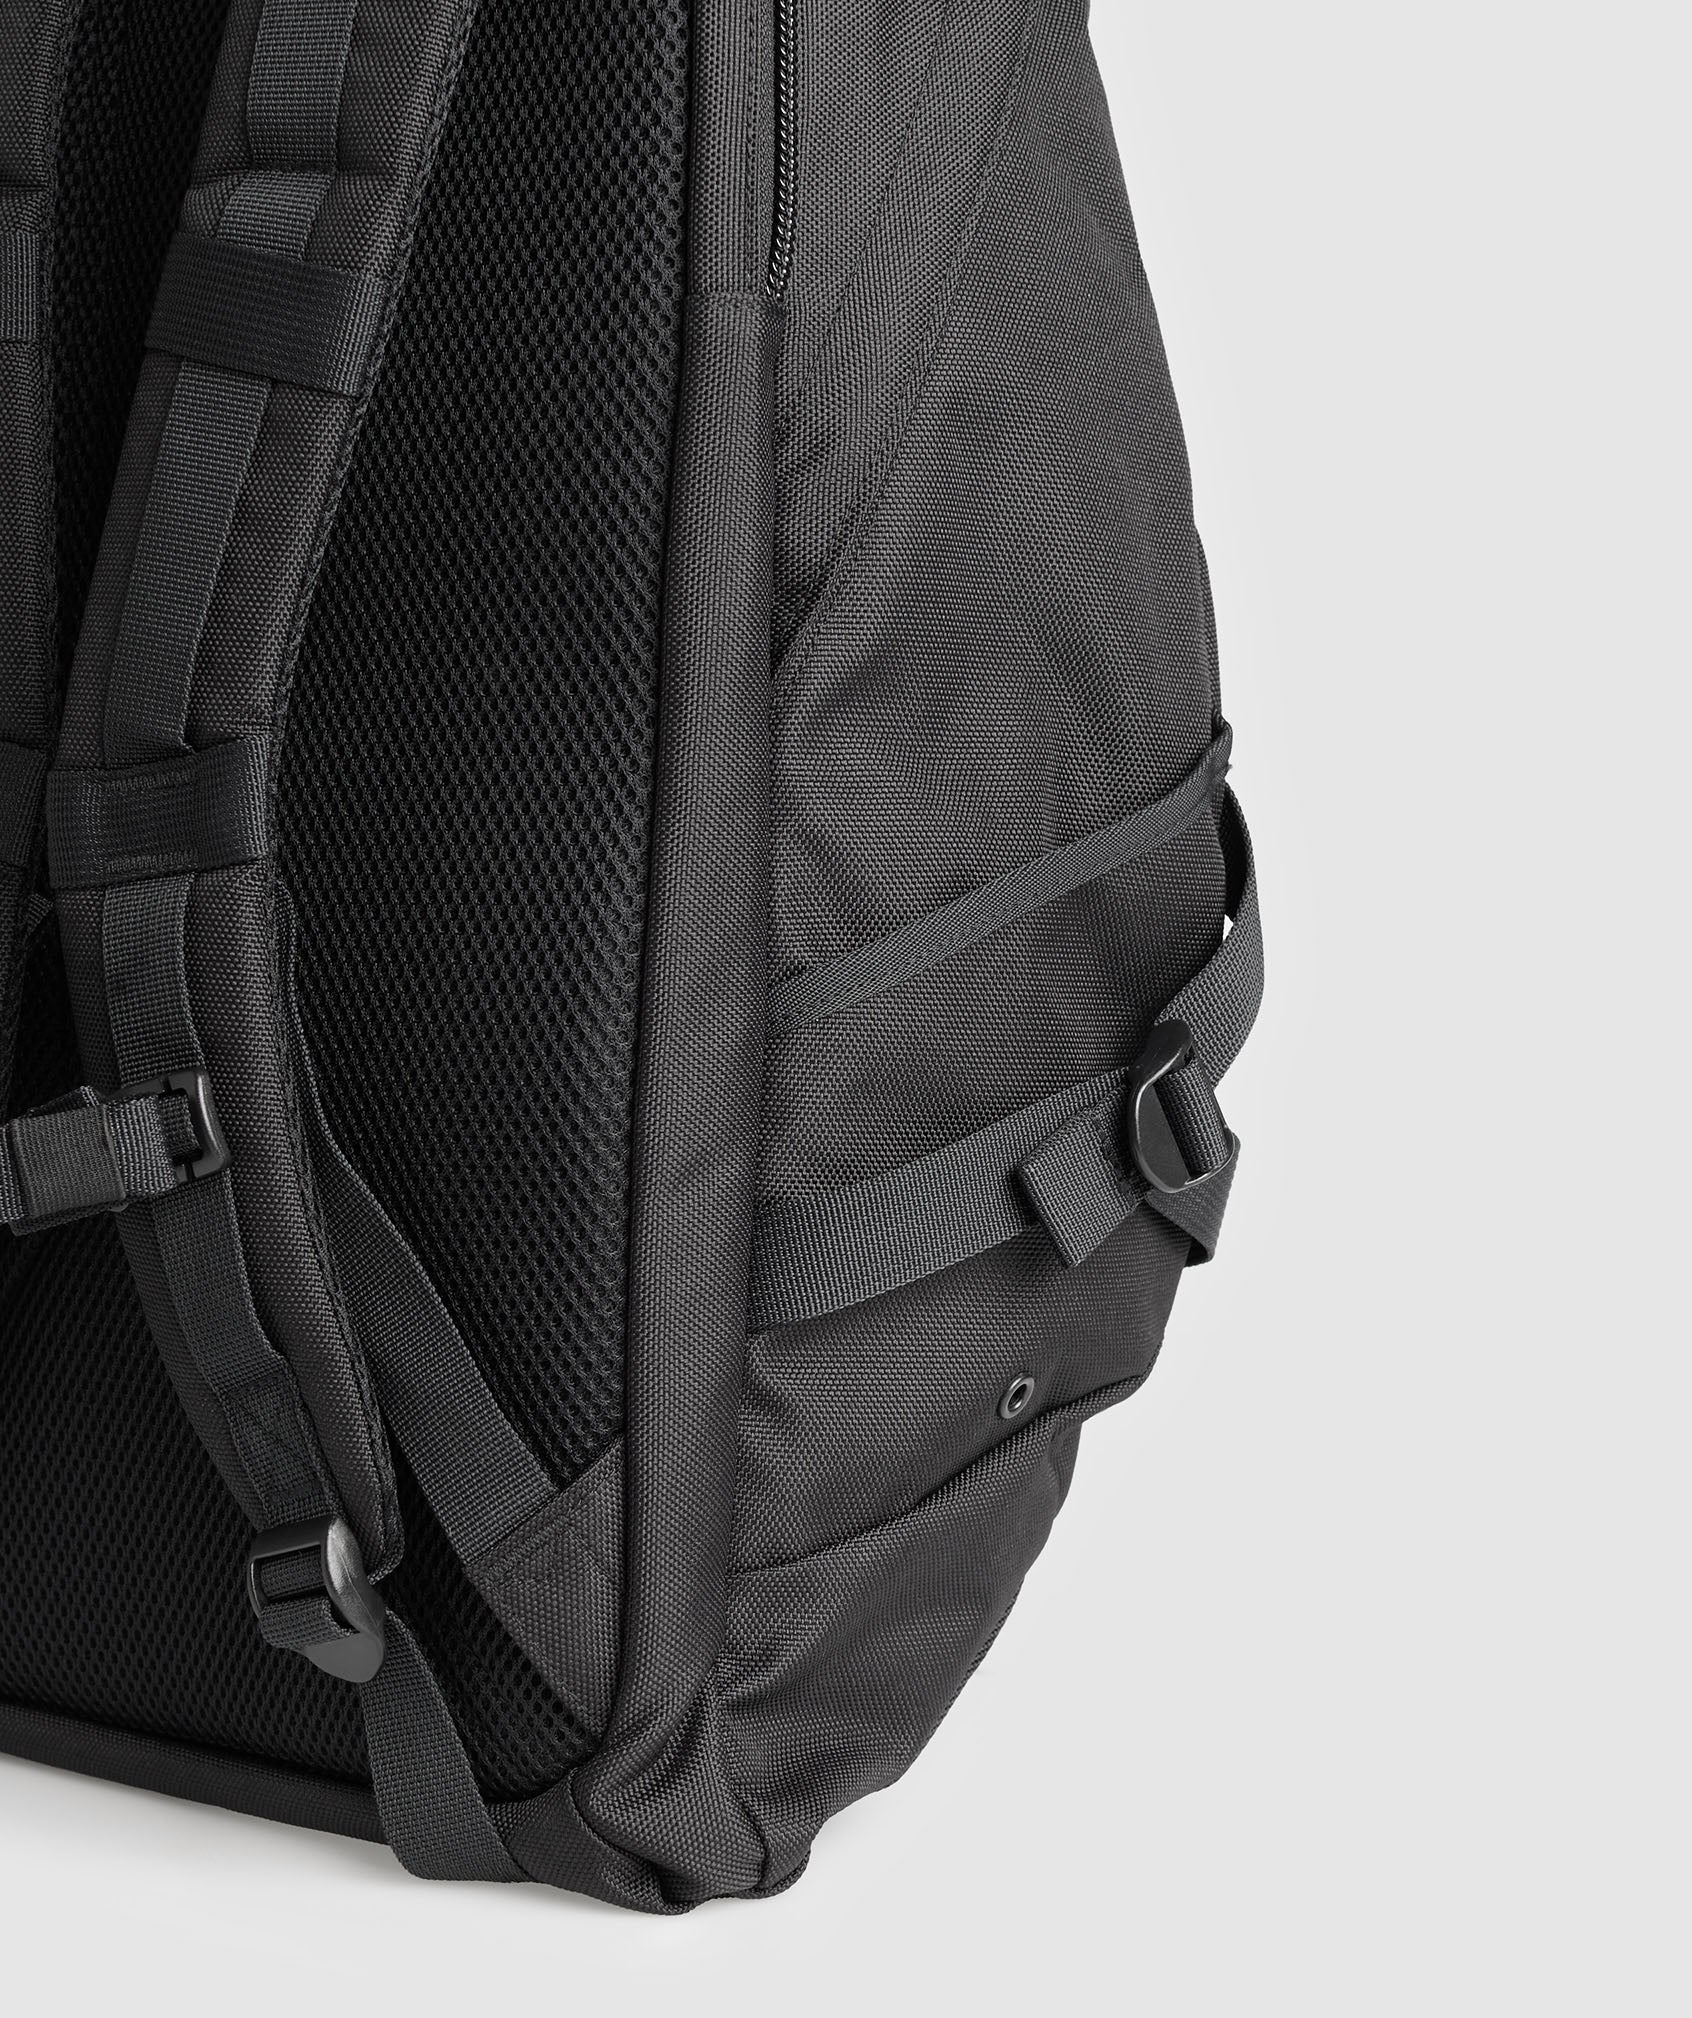 Pursuit Backpack in Black - view 3